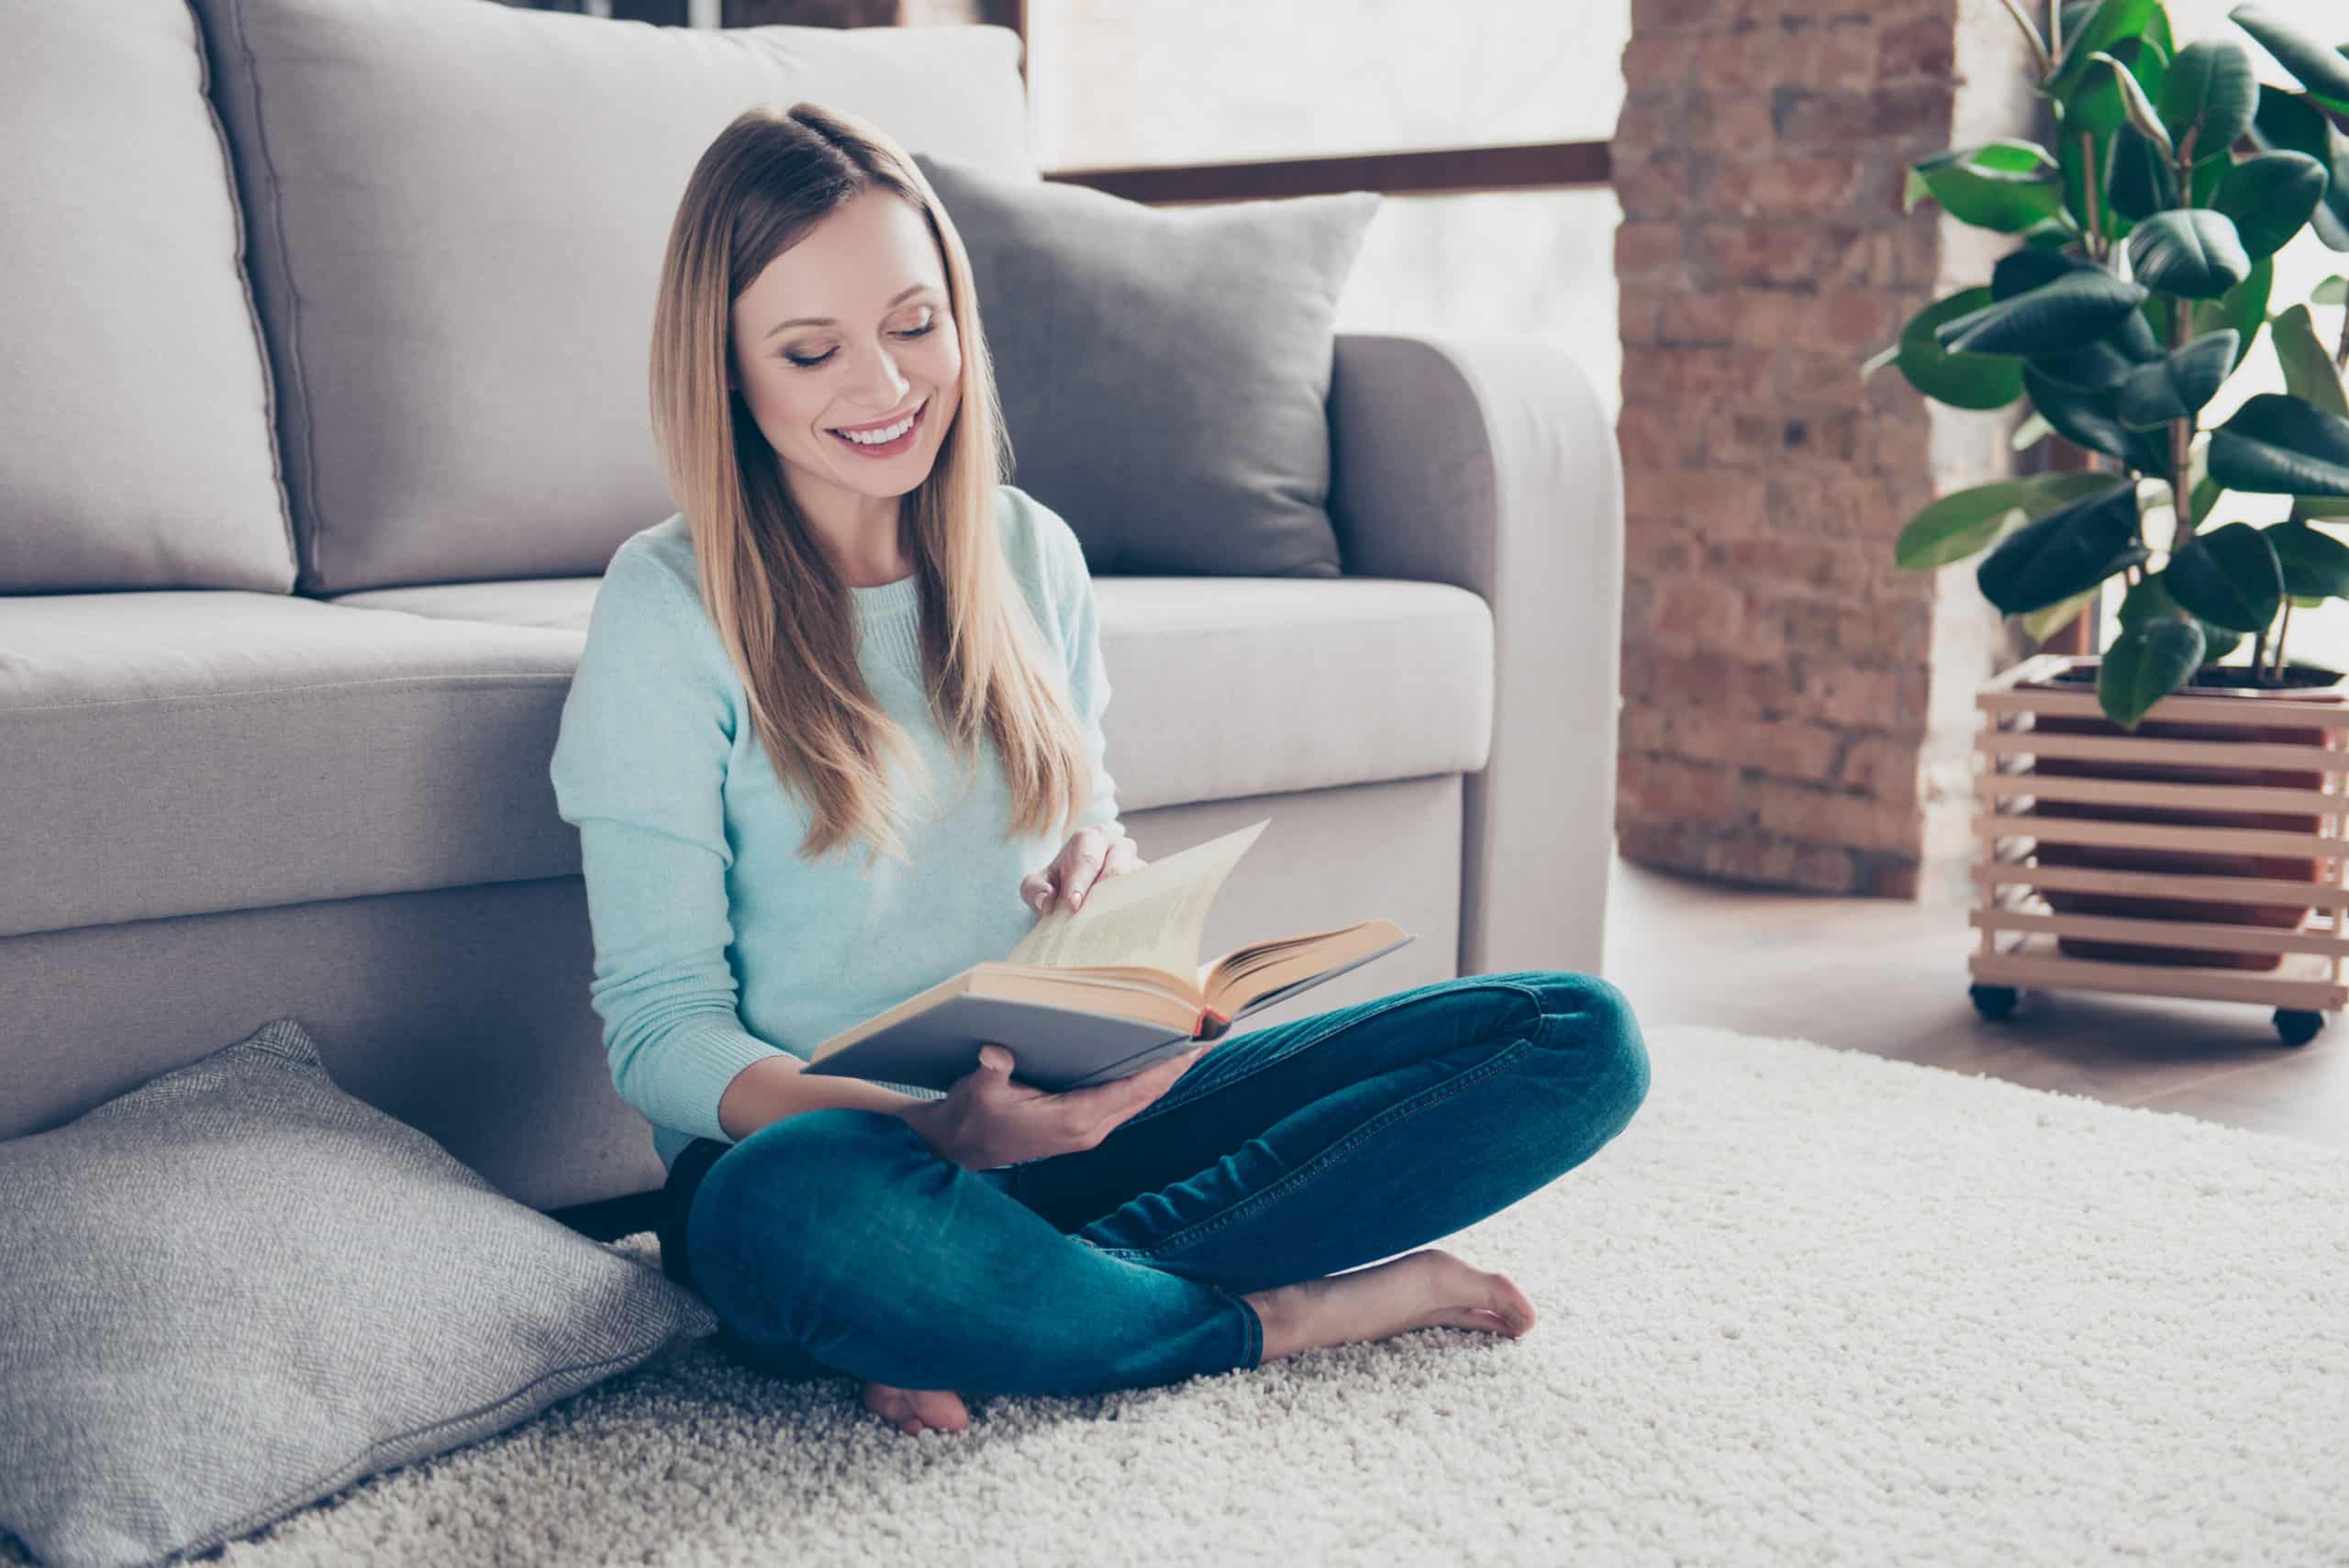 Woman reading a book while sitting comfortably on the floor in living room.